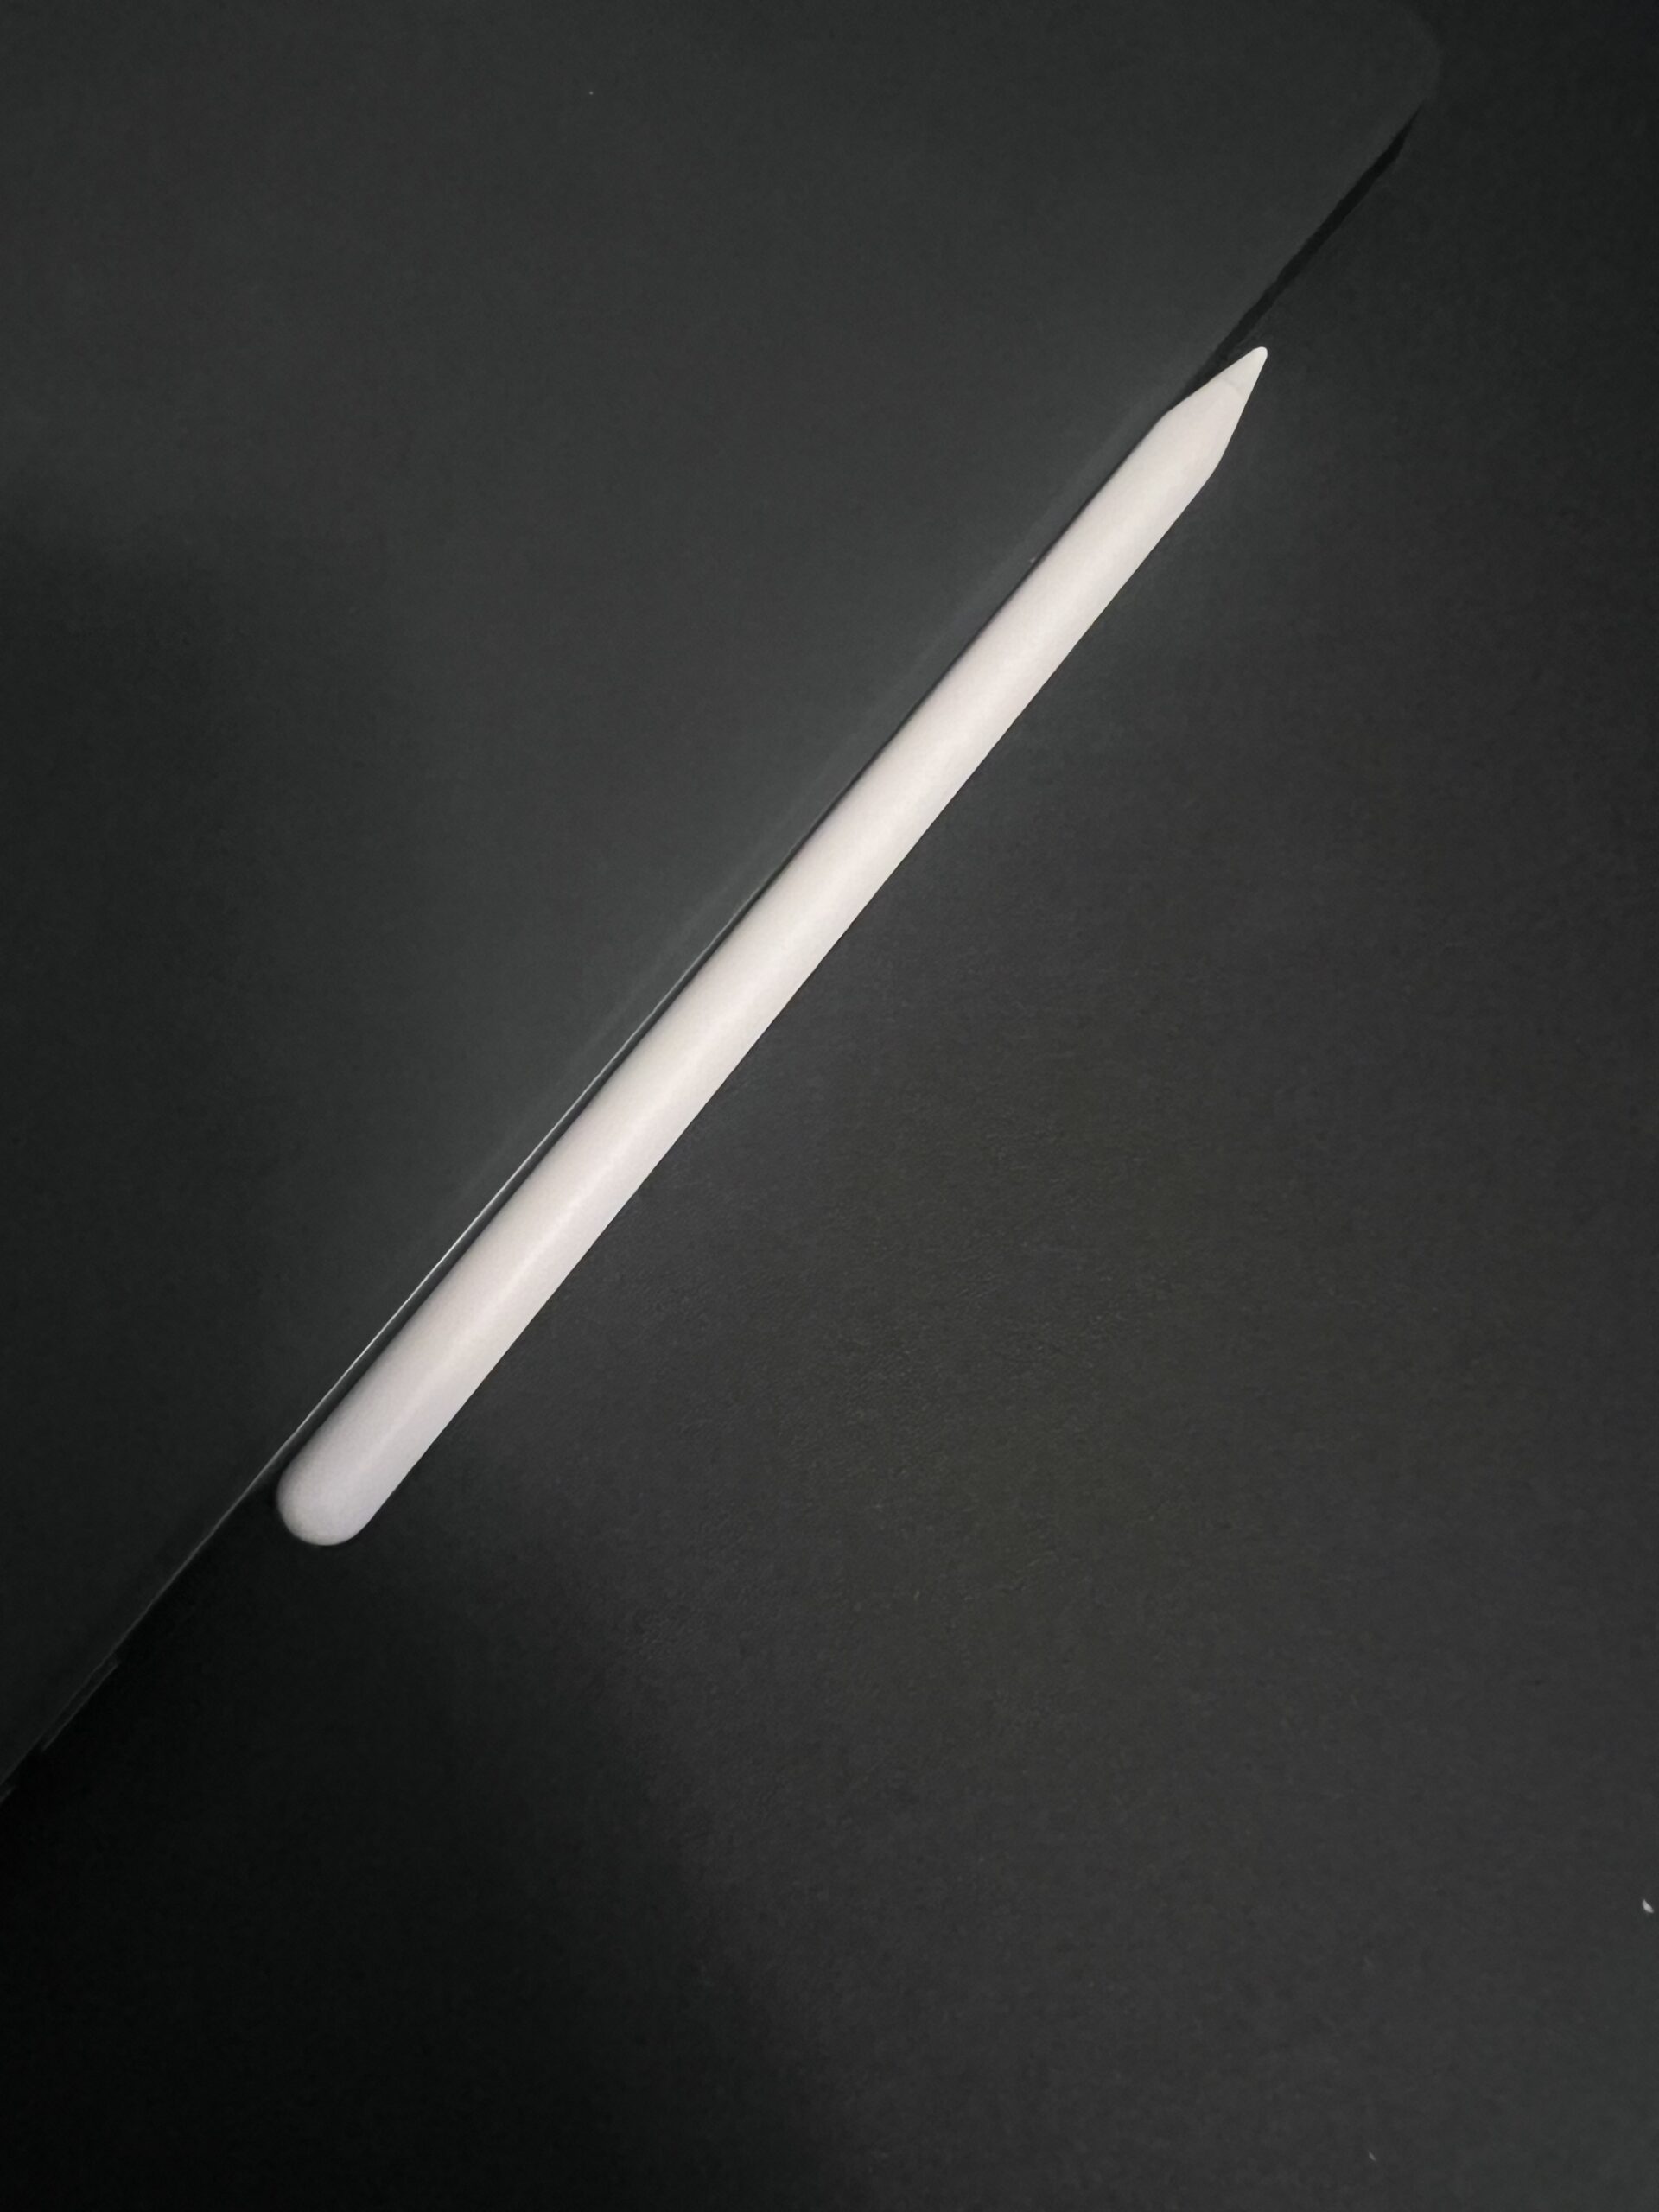 From Drawing to Writing: My Review of the Versatile Apple Pencil